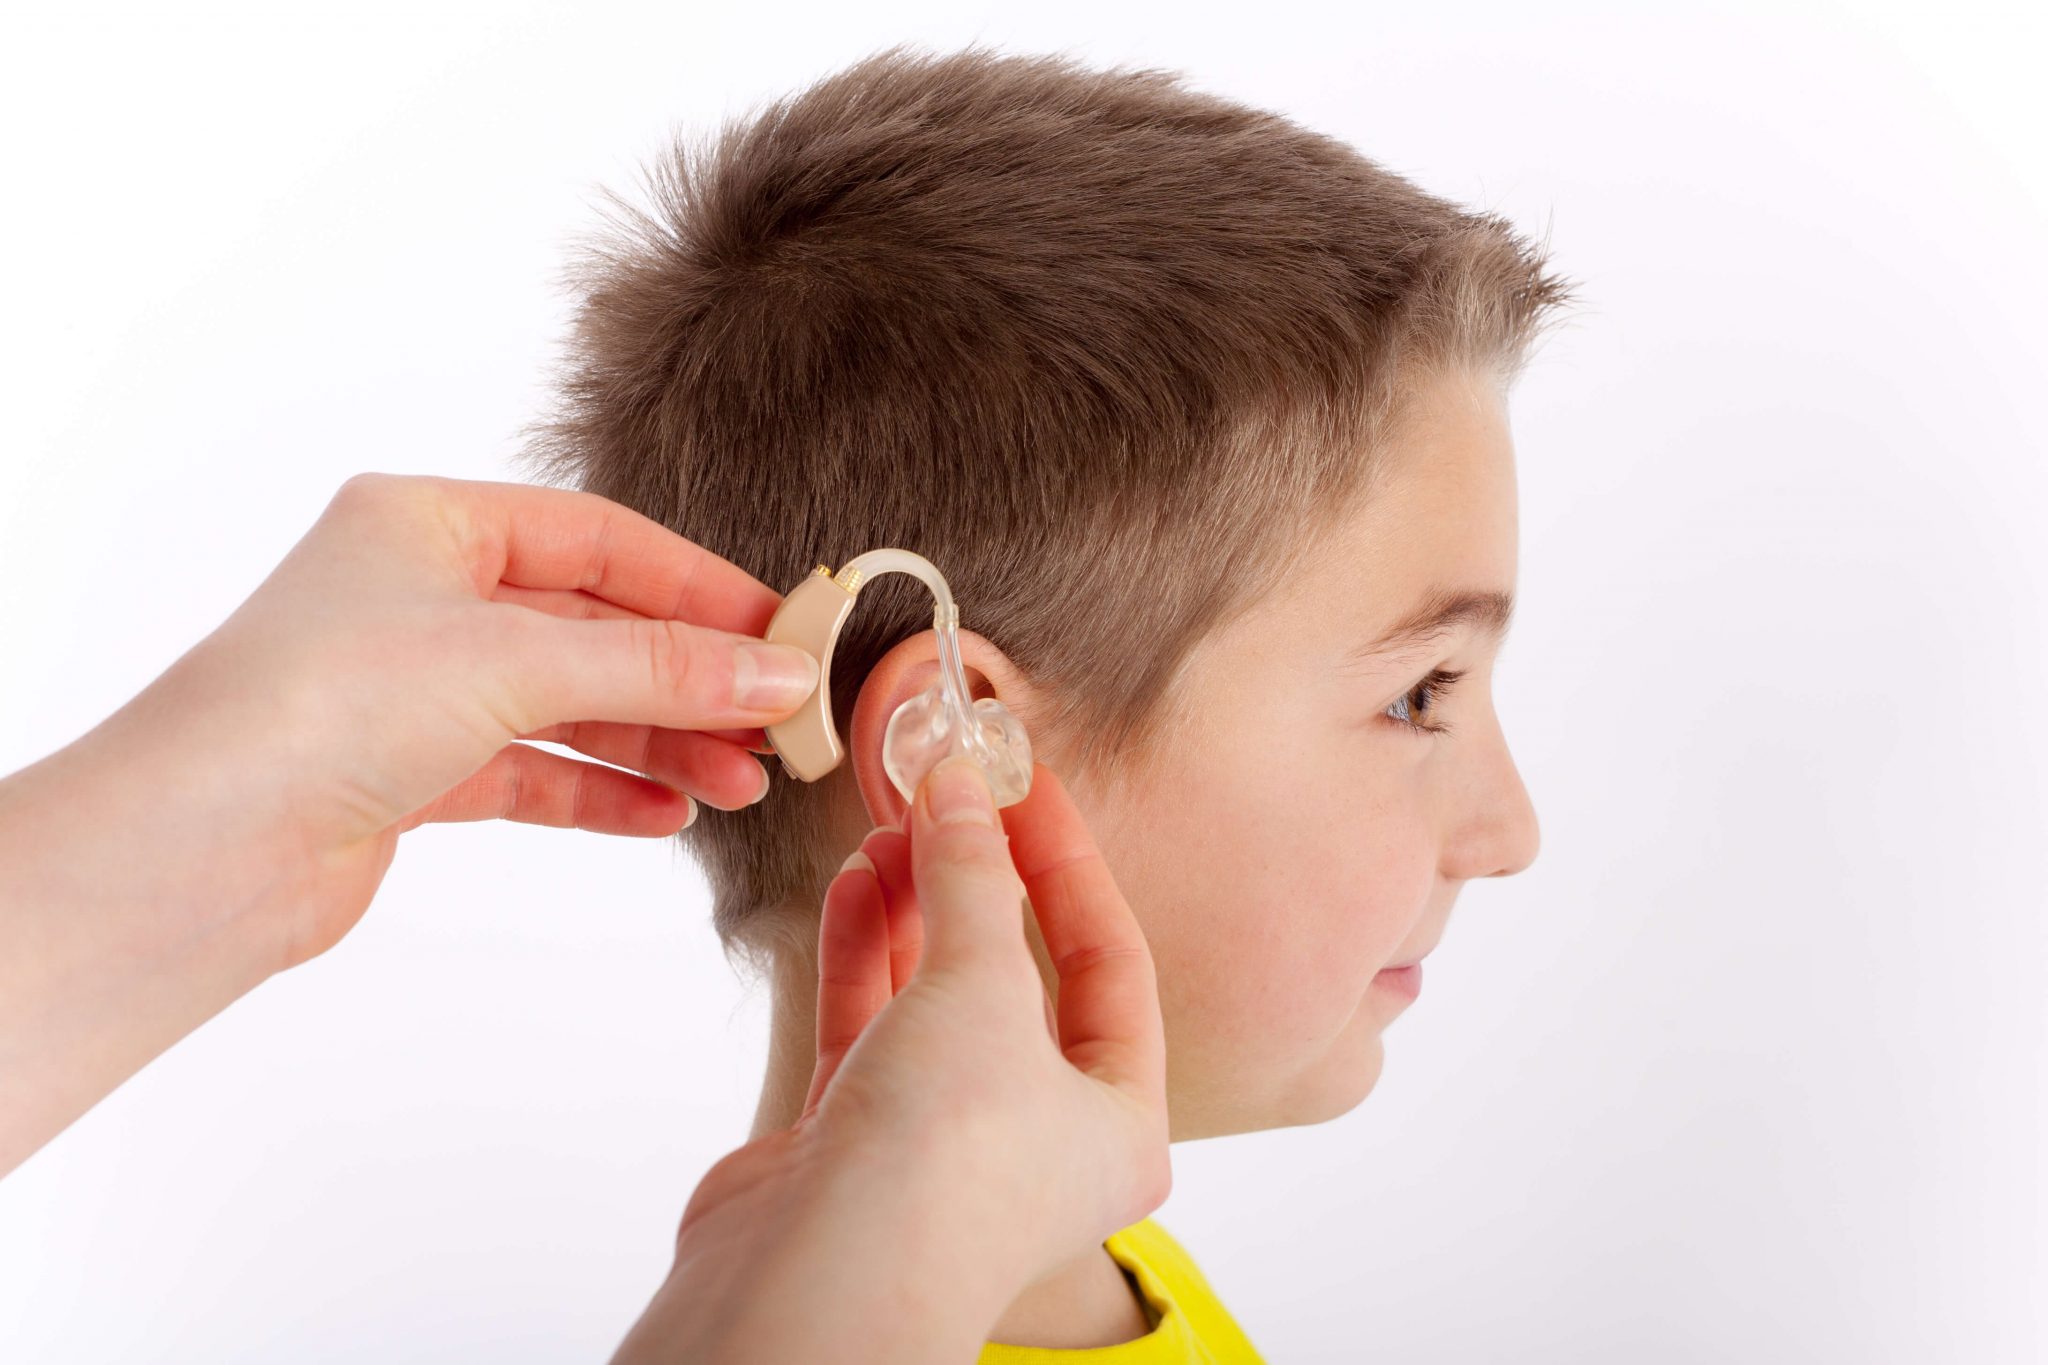 speech and hearing problems